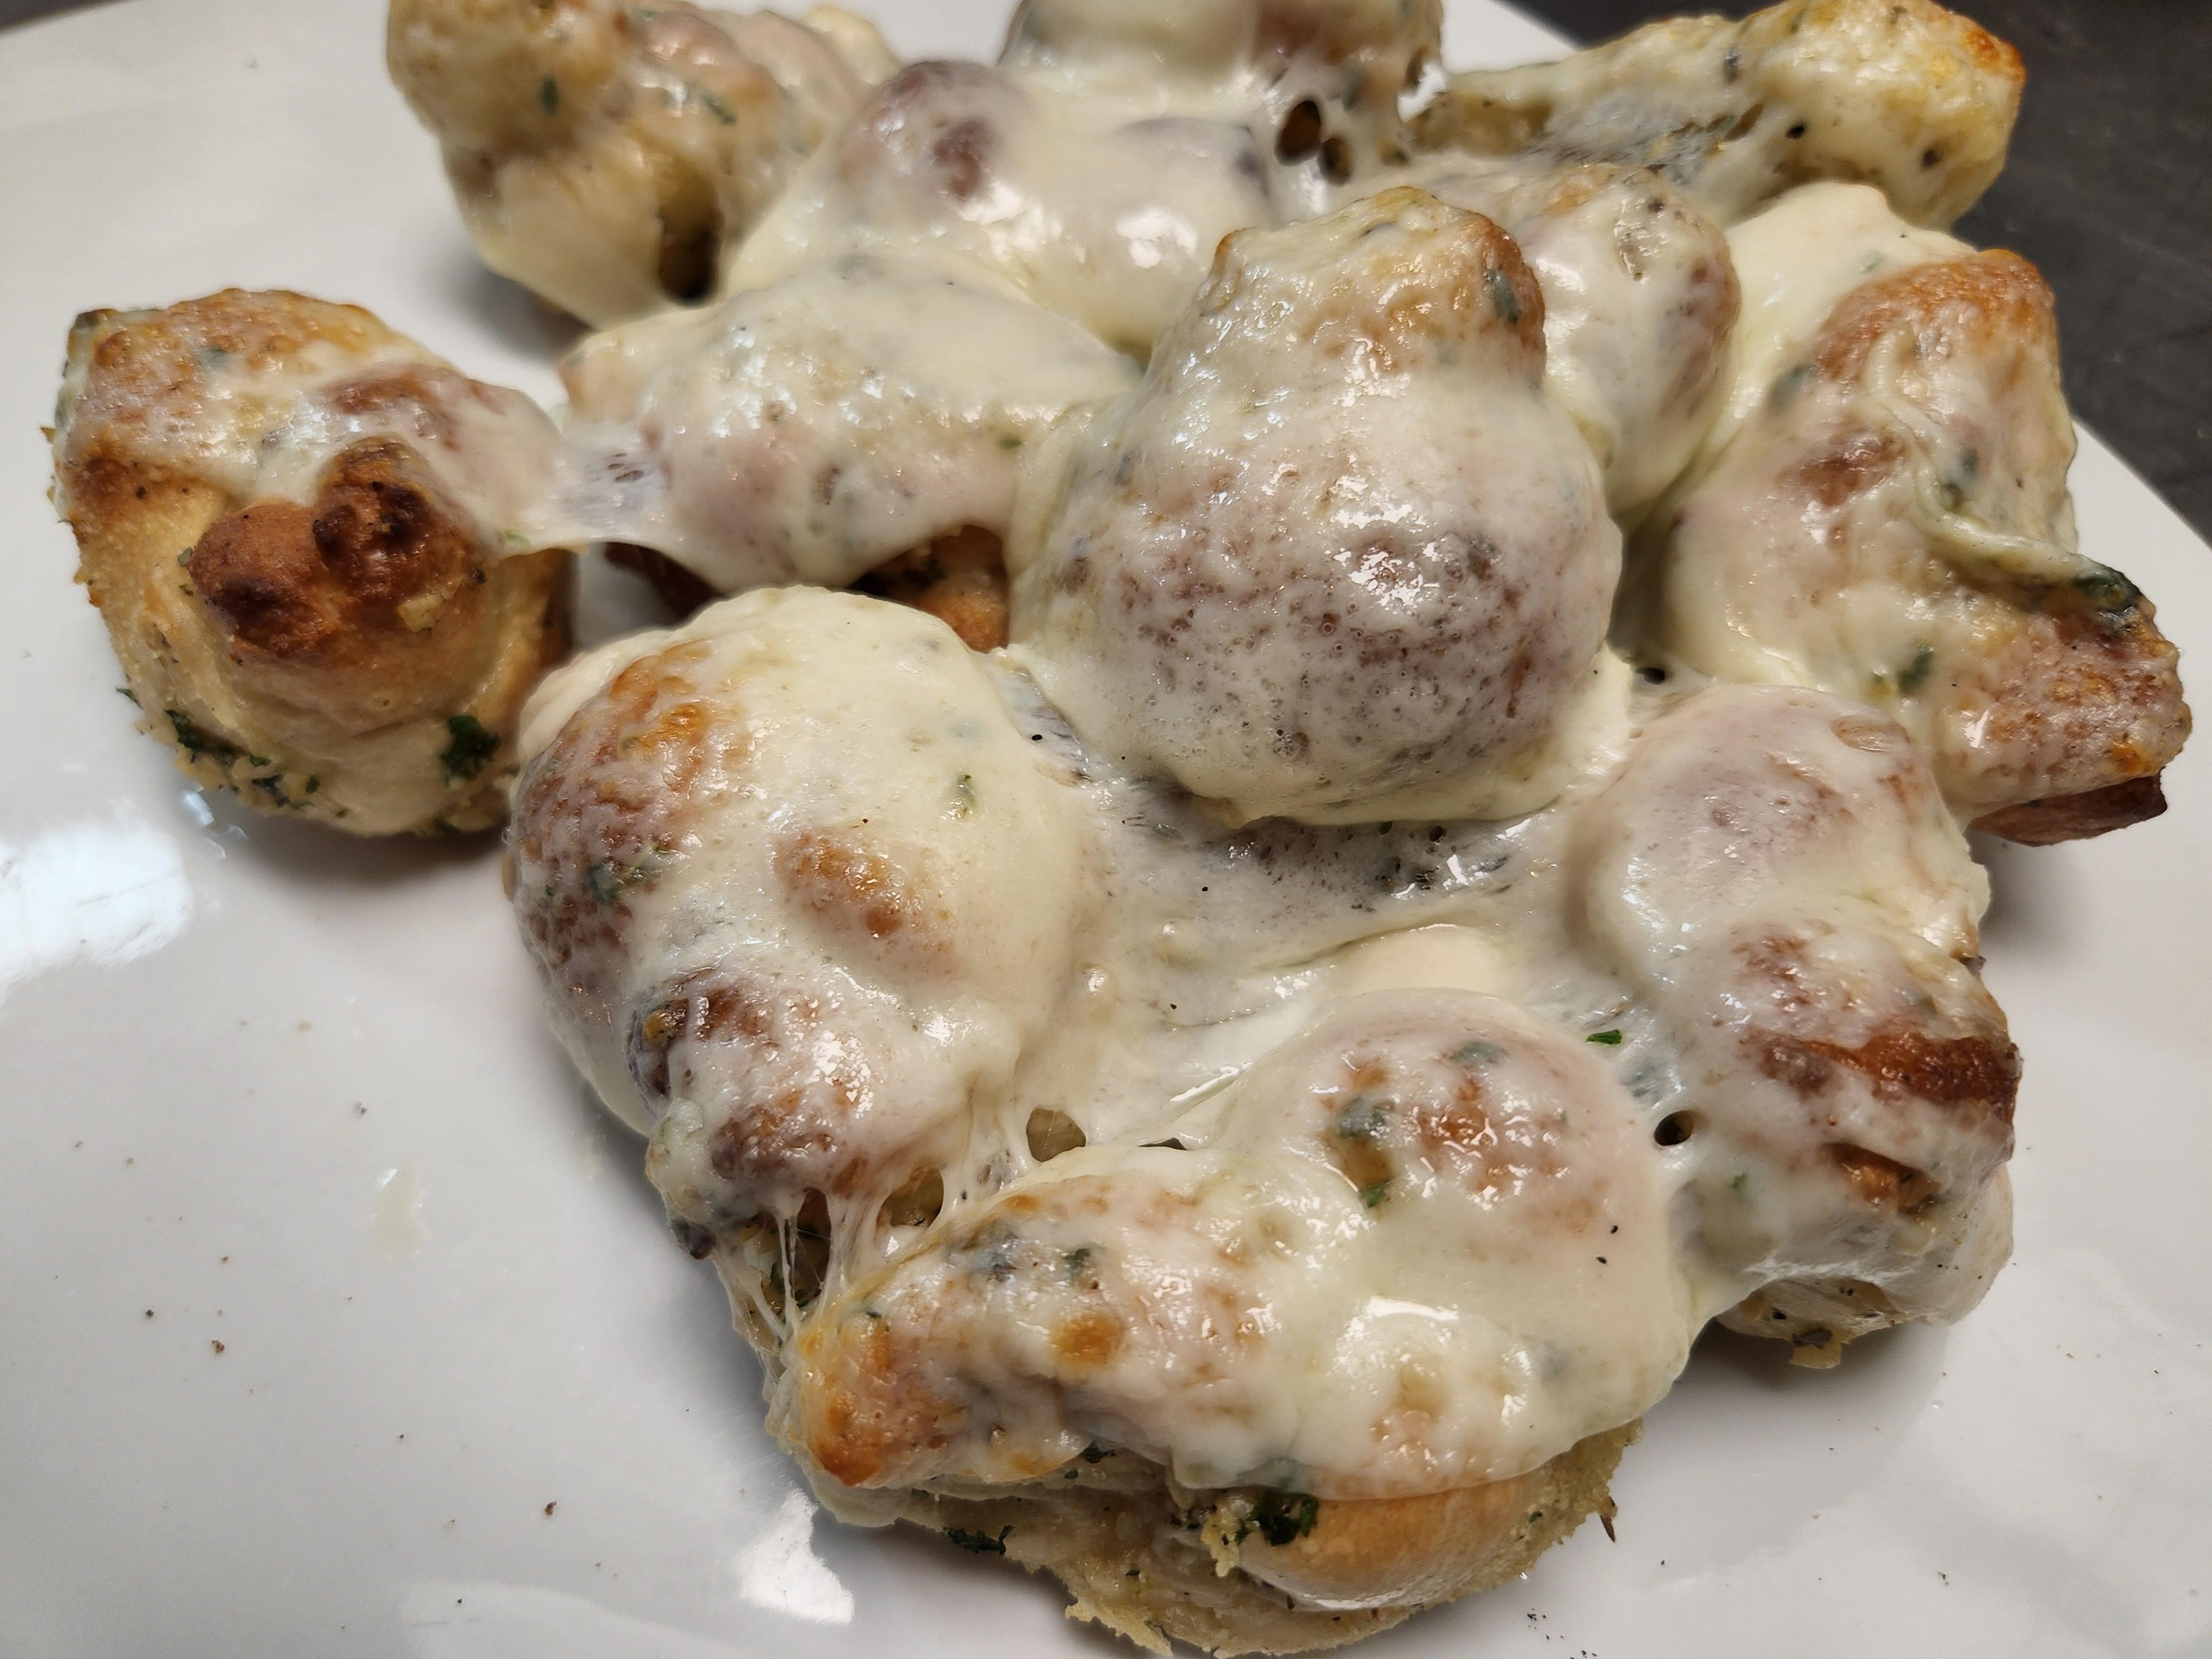 GARLIC KNOTS WITH CHEESE 6 CT